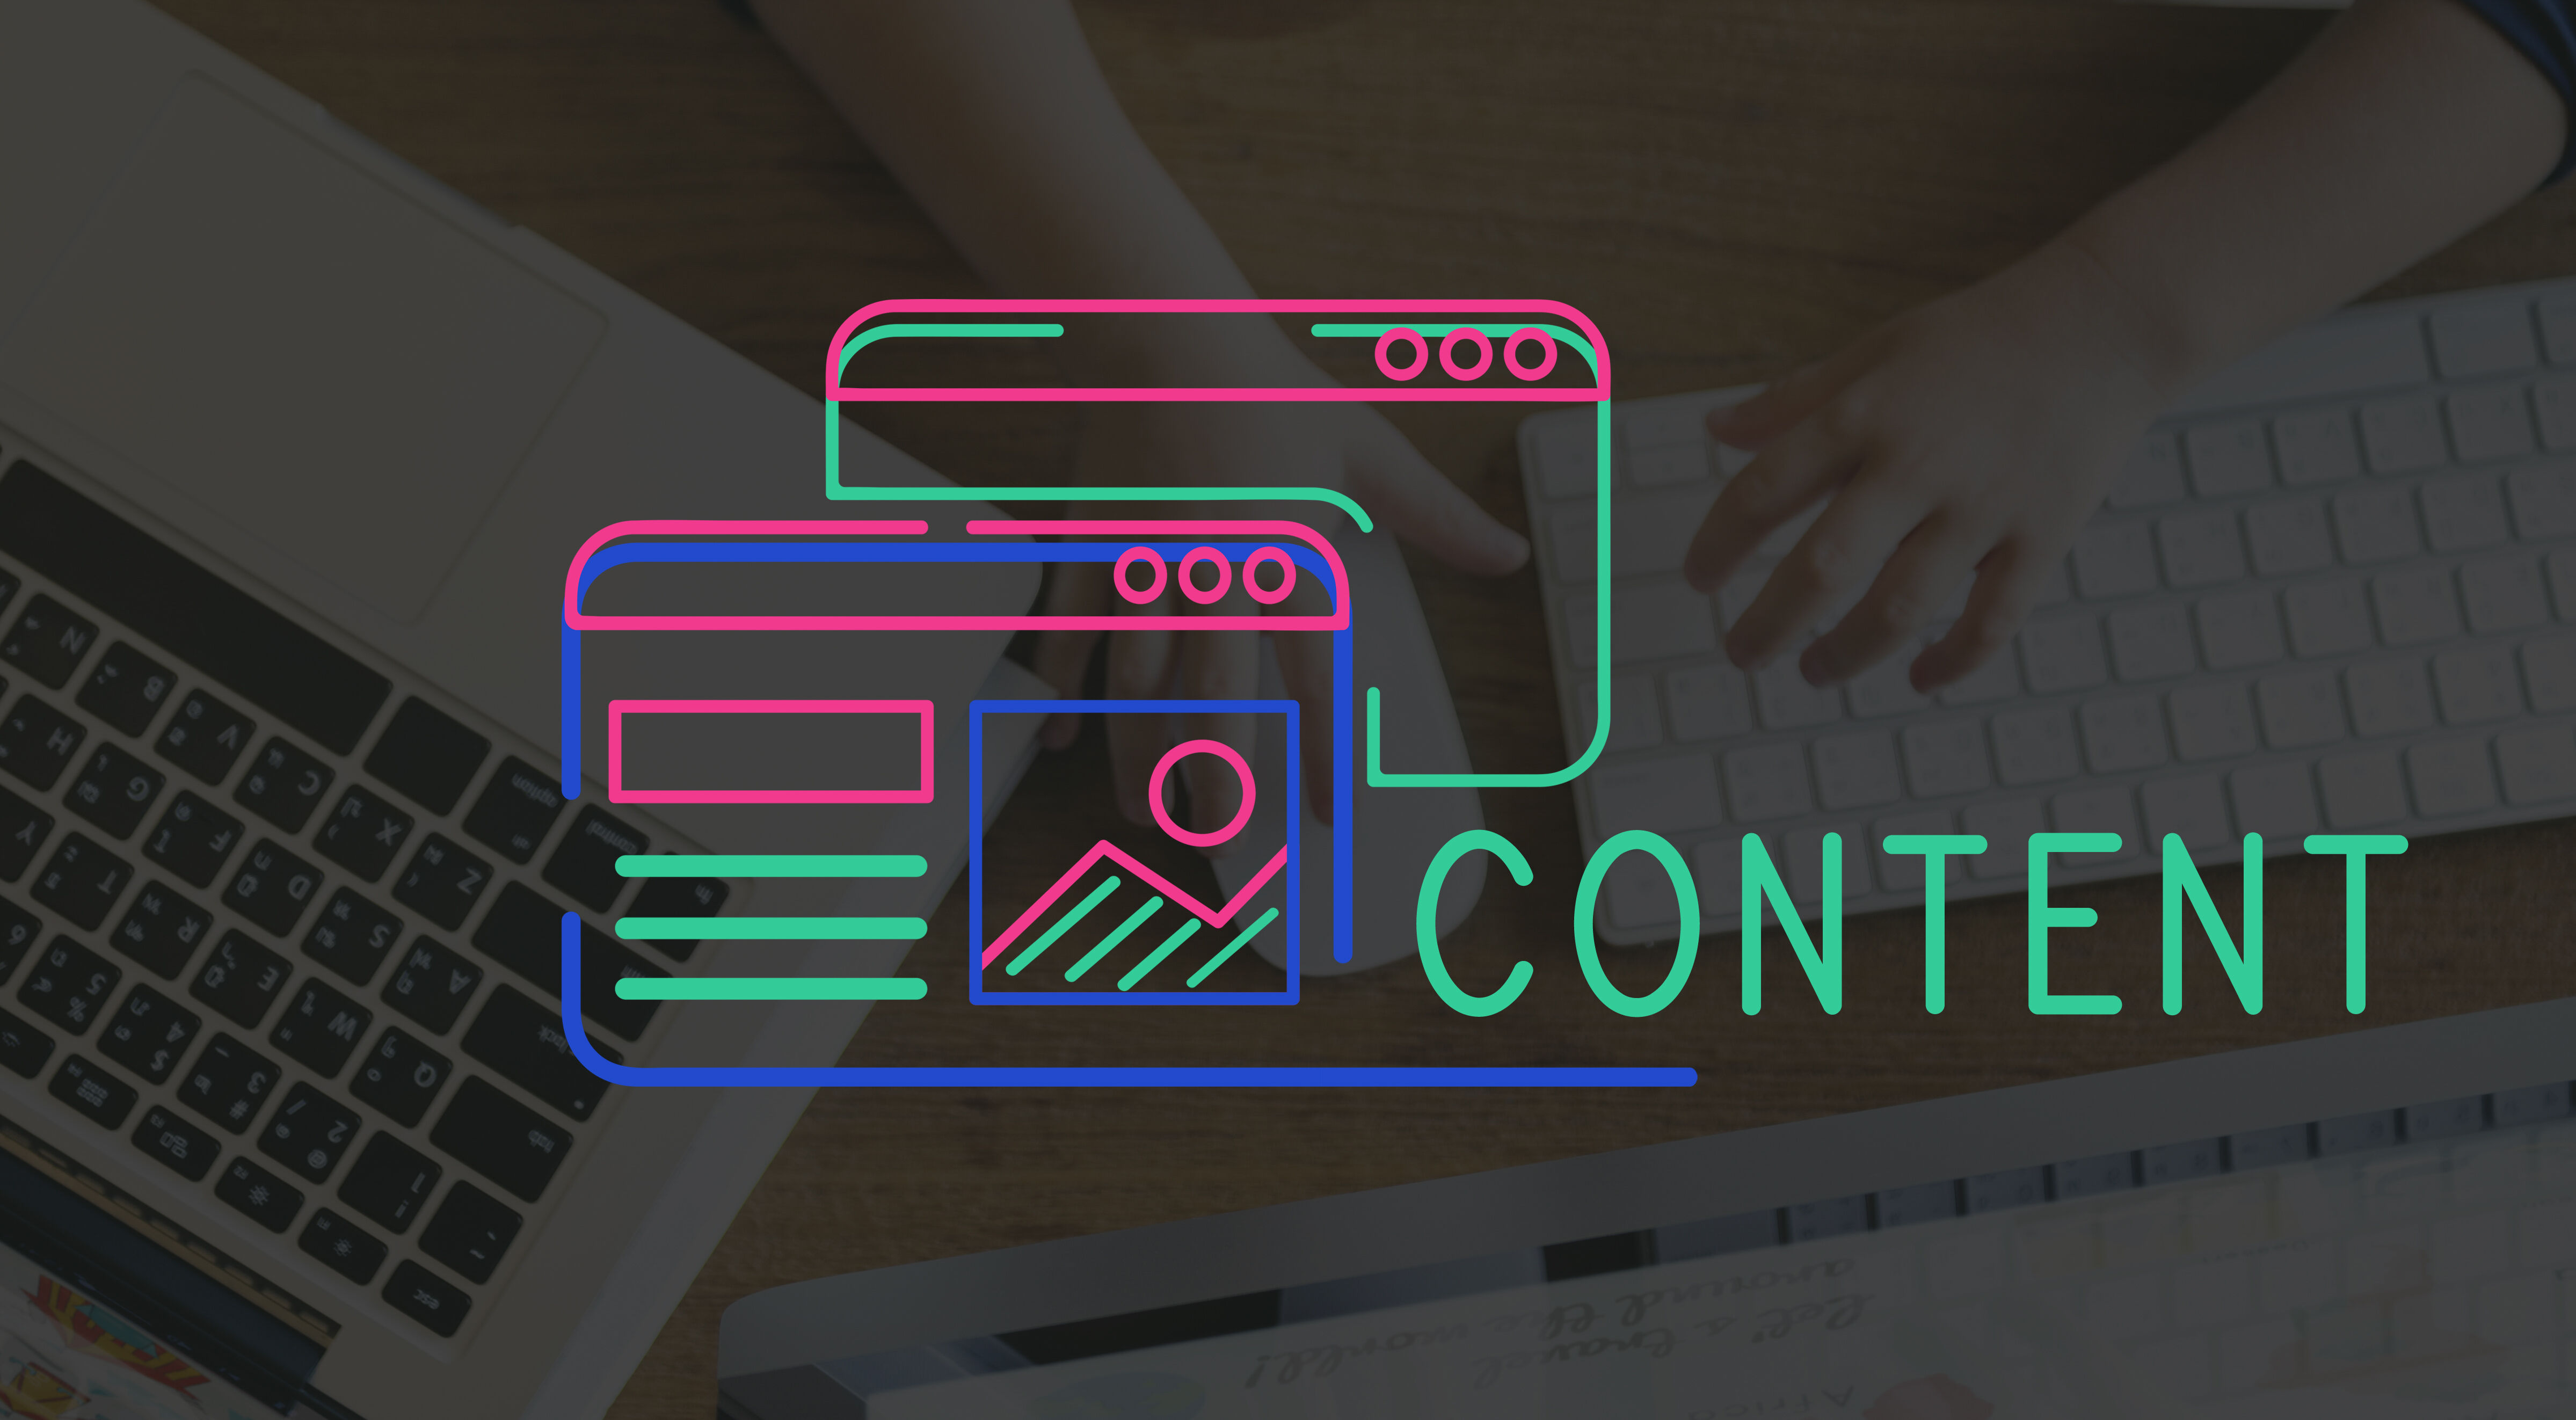 How to build brand trust through content marketing